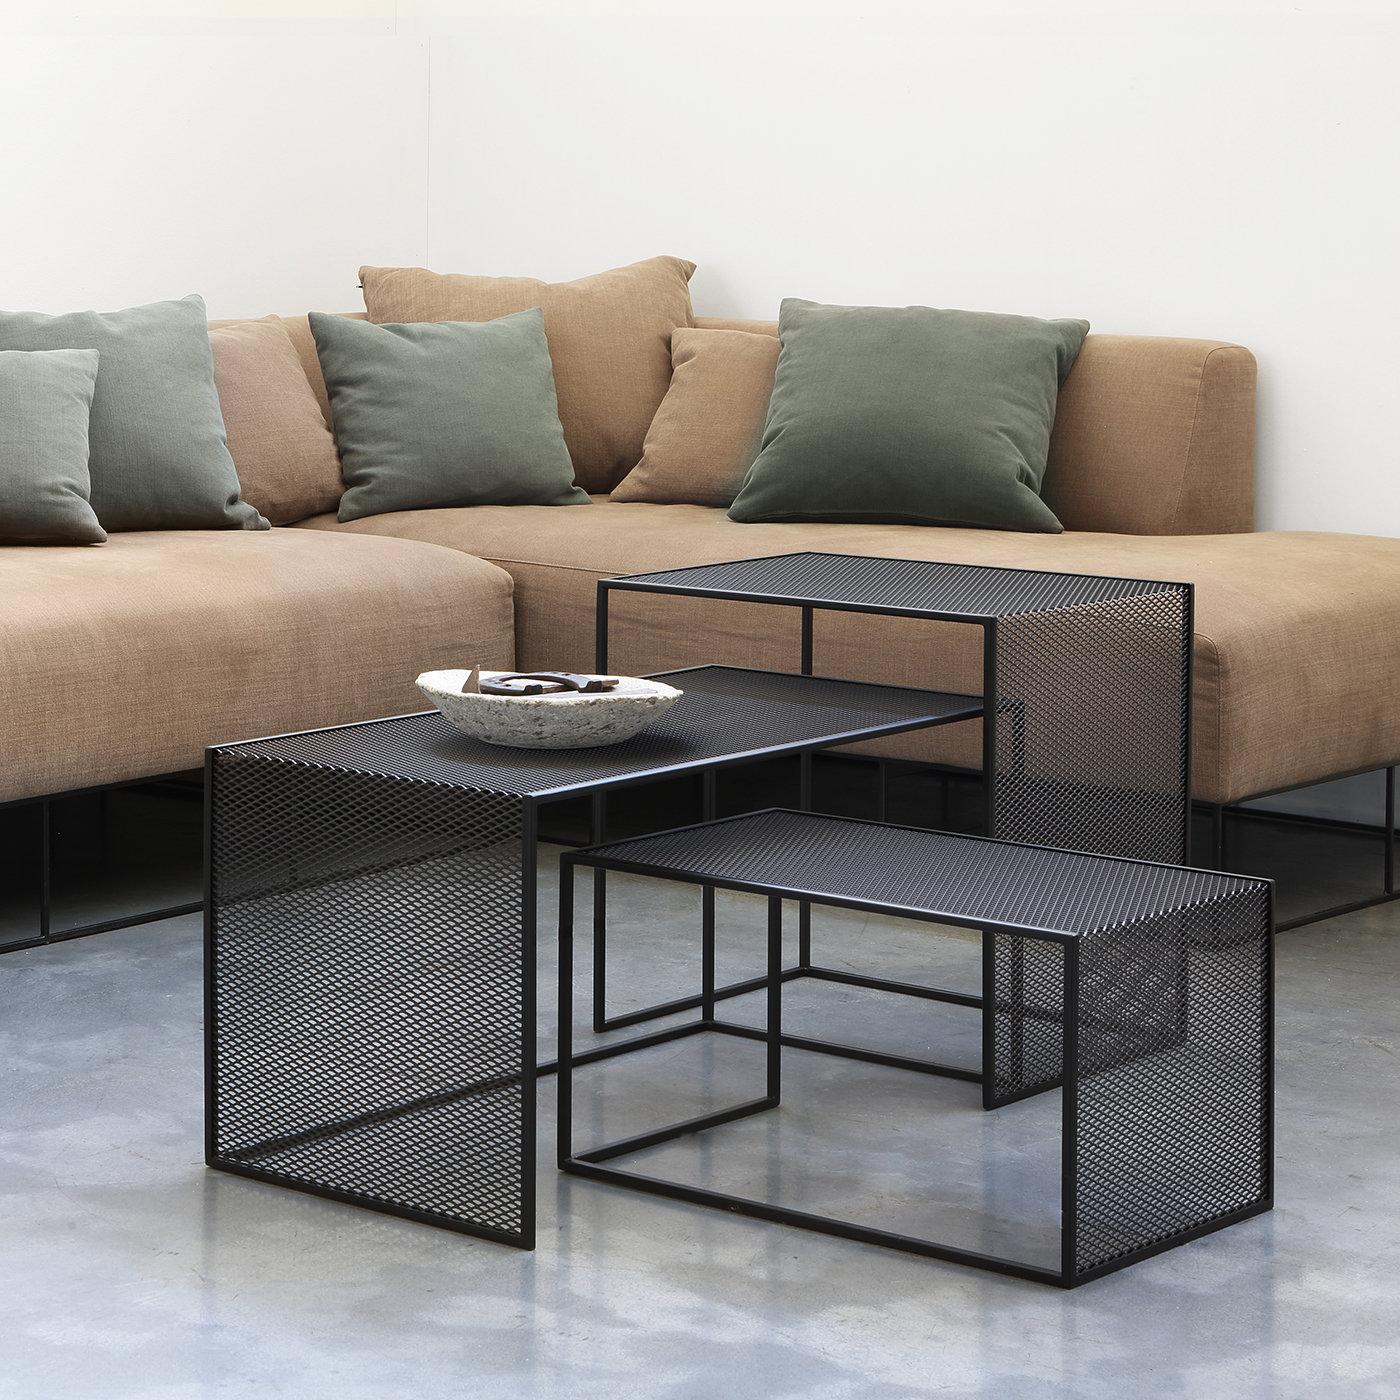 Highly functional and original in design, the Tristano Low Tables are crafted with a frame in 10 x 10 mm solid steel tube and the top and sides in expanded metal. The composition of three tables of varying sizes (40 x 80 x H 40 cm / 35 x 55 x H 30